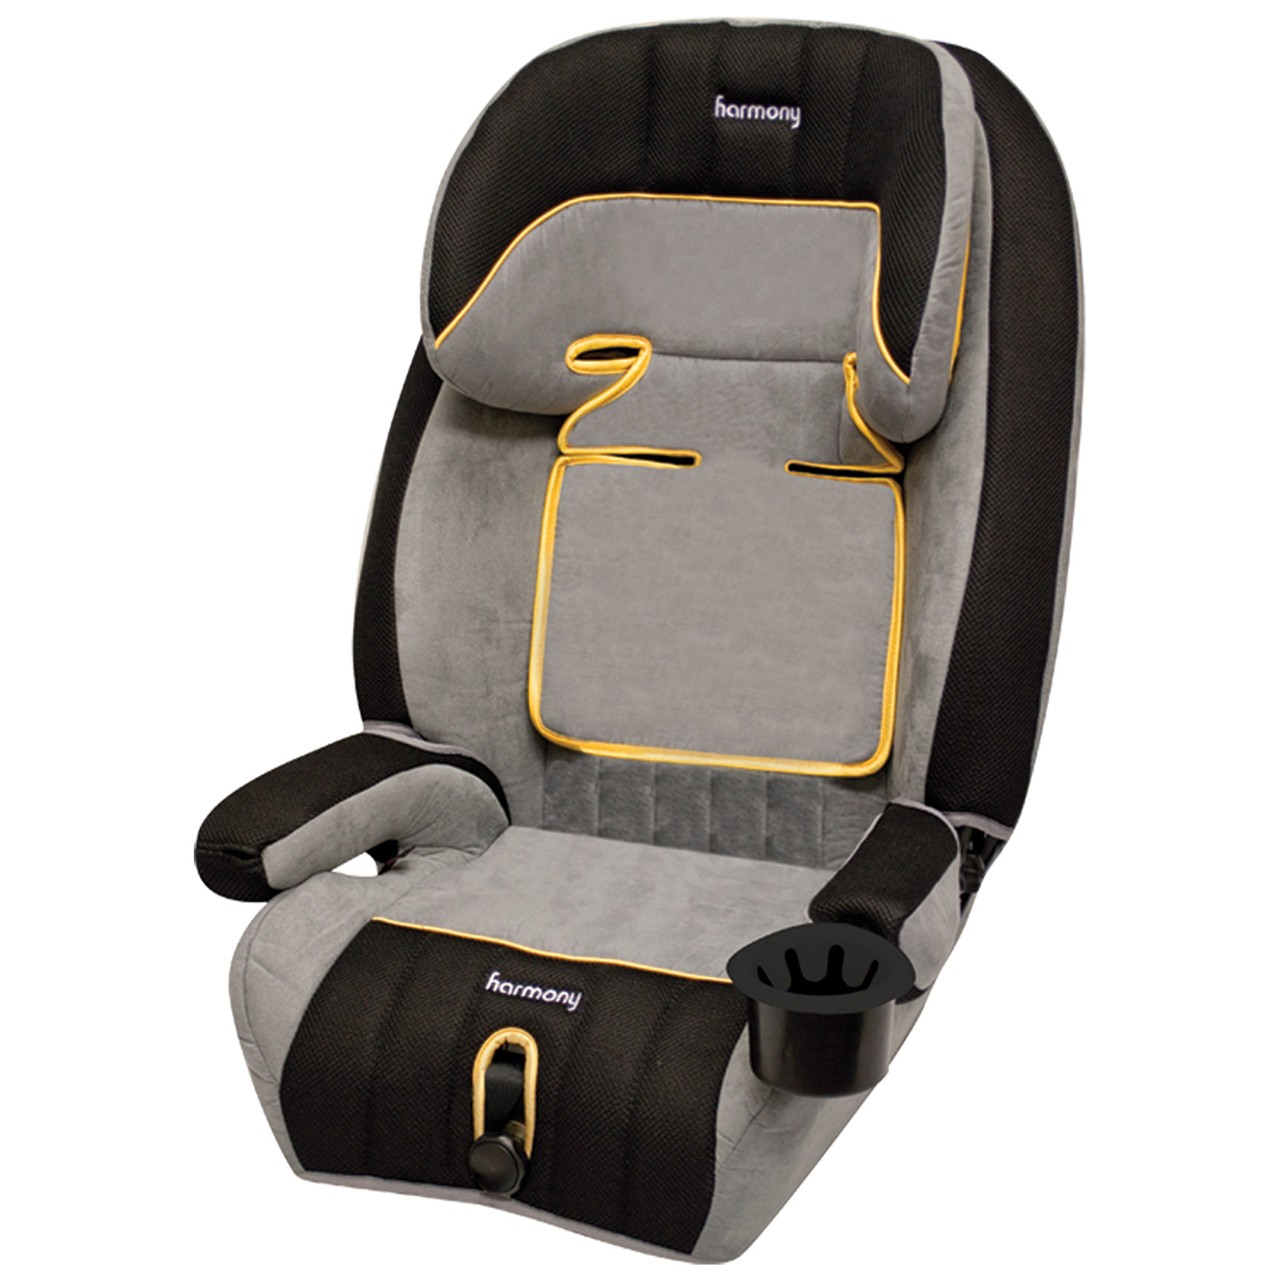 Defender 360° 3-in-1 Combination Deluxe Car Seat - Pirate Gold